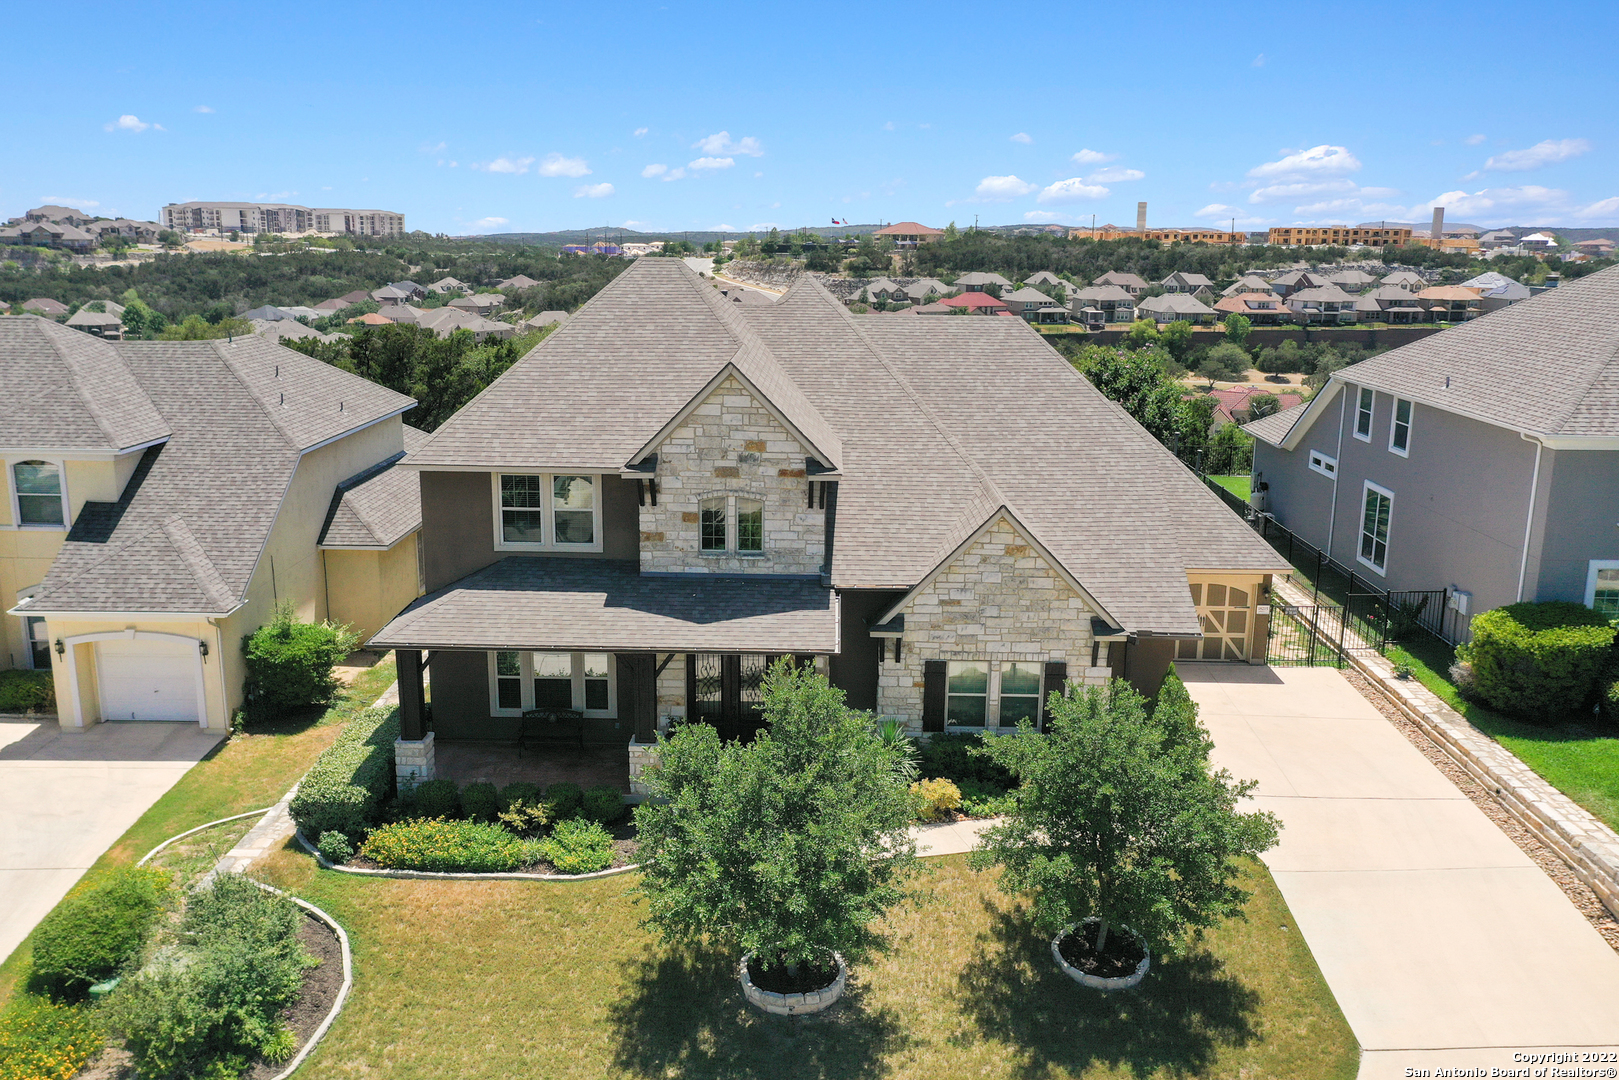 This majestic property is situated on .25 acres and offers stunning interior finishes adding to the home's unique and sophisticated feel. You will have quick and easy access to 1-10 & loop 1604 with close proximity to La Cantera, The Rim, UTSA, USAA, Medical Center, and multiple upscale golf courses! Upon arrival, gorgeous curb appeal is evident through the meticulously maintained lawn, delicate landscaping, light stone with contrasting stucco, and stylish structure. Inside, a grand foyer greets you with soaring ceilings and views of the detailed wrought iron staircases. Rich hardwood floors guide guests to the formal living space with an ornate chandelier and natural lighting. In the common areas, picture windows are highlighted by stone accents, a spacious living room with surround sound, and a warm fireplace. The household gourmet chef will revel in the top-of-the-line GE Monogram appliances, including the GE Elite Pro water filtration system. Stylish yet functional selections include all-white cabinetry, complementing counters, a stylish backsplash, a custom granite island with bar seating, and an eat-in kitchen. Dedicated office space is also located on the main leave with French doors for privacy. Retreat to the luxurious-sized primary offering tray ceilings, bay windows, and room for a seating area. The en suite offers granite counters, a spa-like soaking tub, a roomy walk-in shower, and travertine tile. A generous game room can be found upstairs for additional entertaining. The media room is also pre-wired for surround sound. Outside, a stained patio with a built-in kitchen also features GE monogram appliances. In addition to all this home has to offer, plenty of green features include attic insulation, double pane windows, enhanced air filtration, and much more. Peace and tranquility are evident with views of the greenbelt and Texas sunsets. **Pool table and living room TV convey with the property**